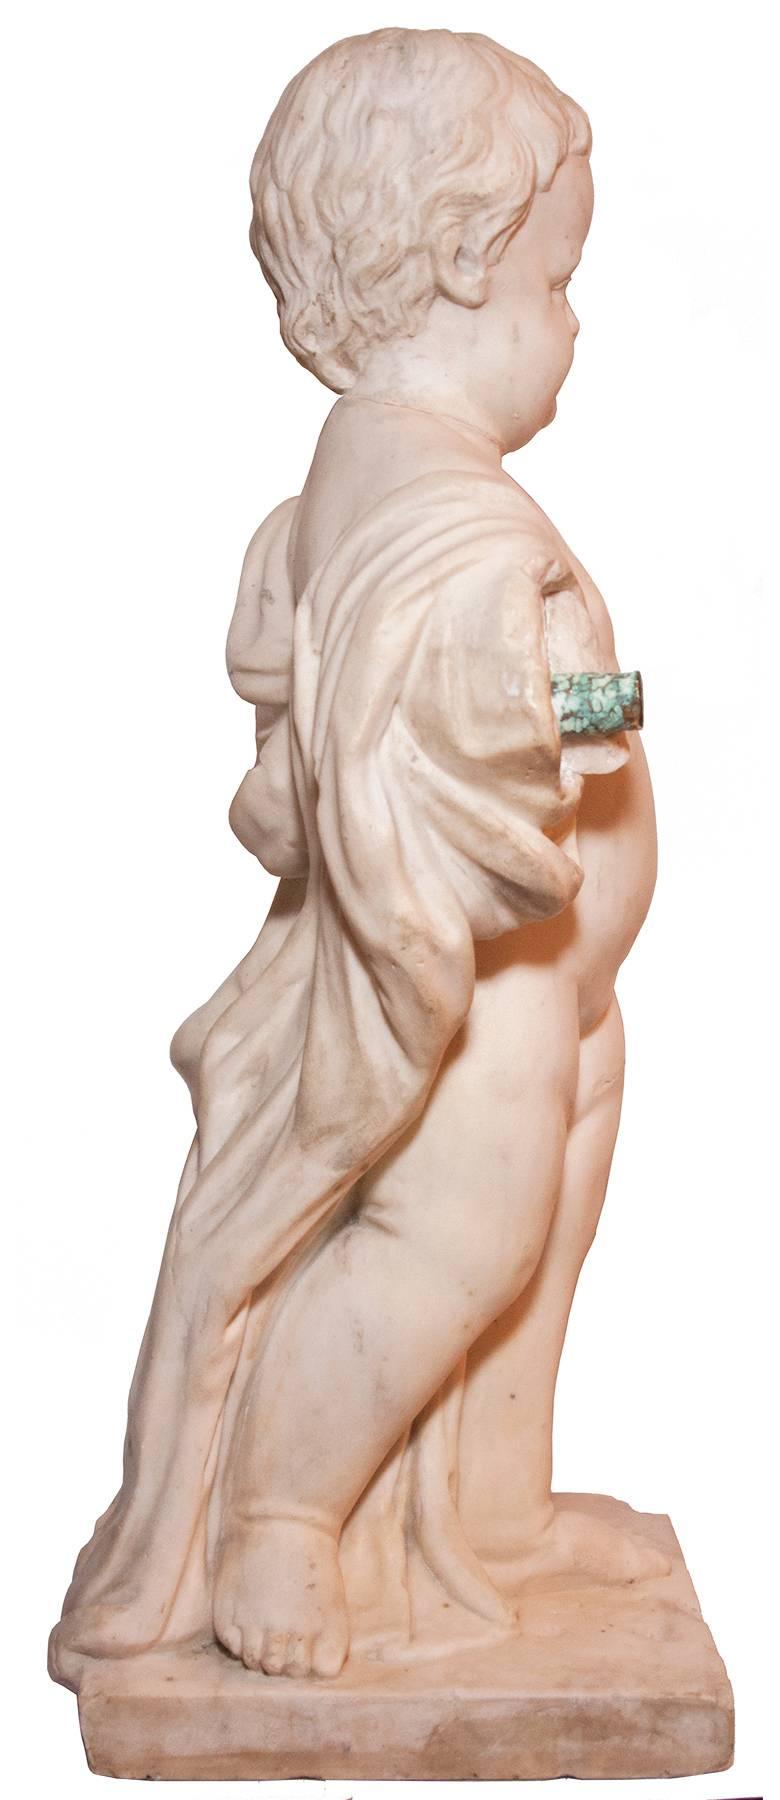 Marble child statue, Italy, late eighteenth century - Sculpture by Unknown